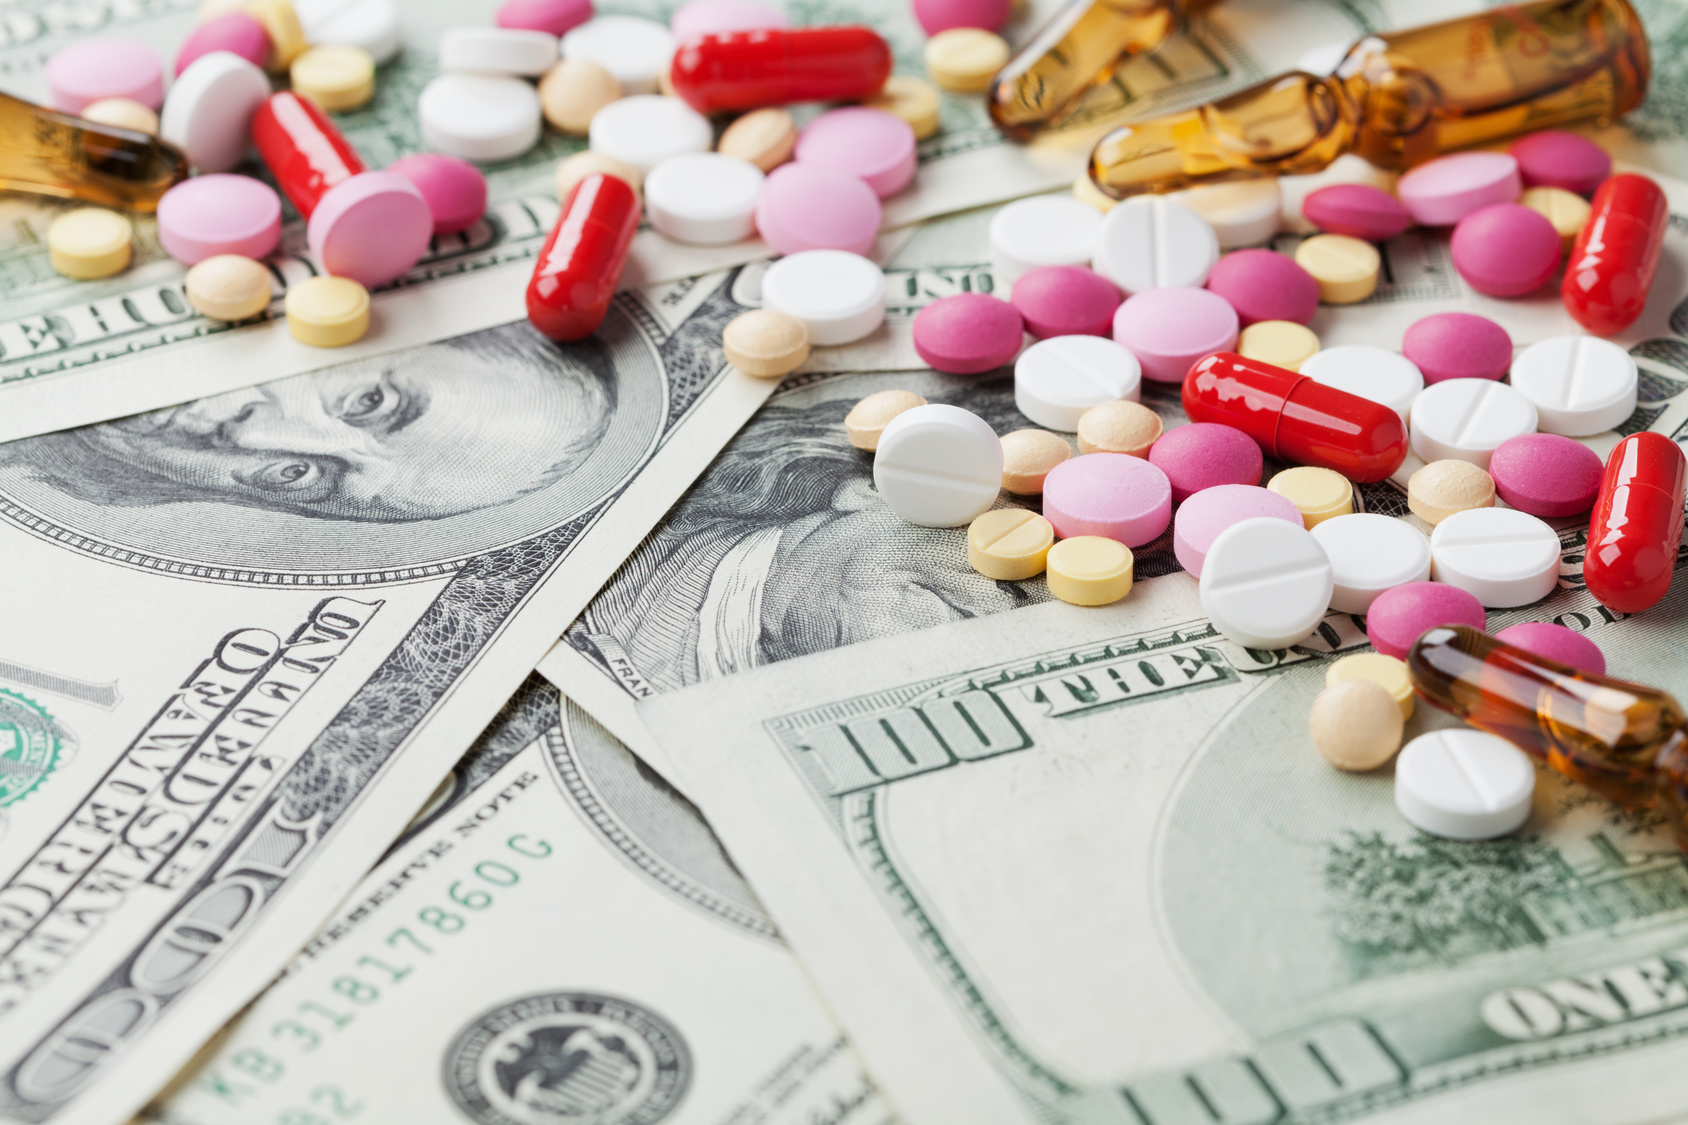 New Guidances Issued to Promote Generic Drug Access and Drug Price Competition